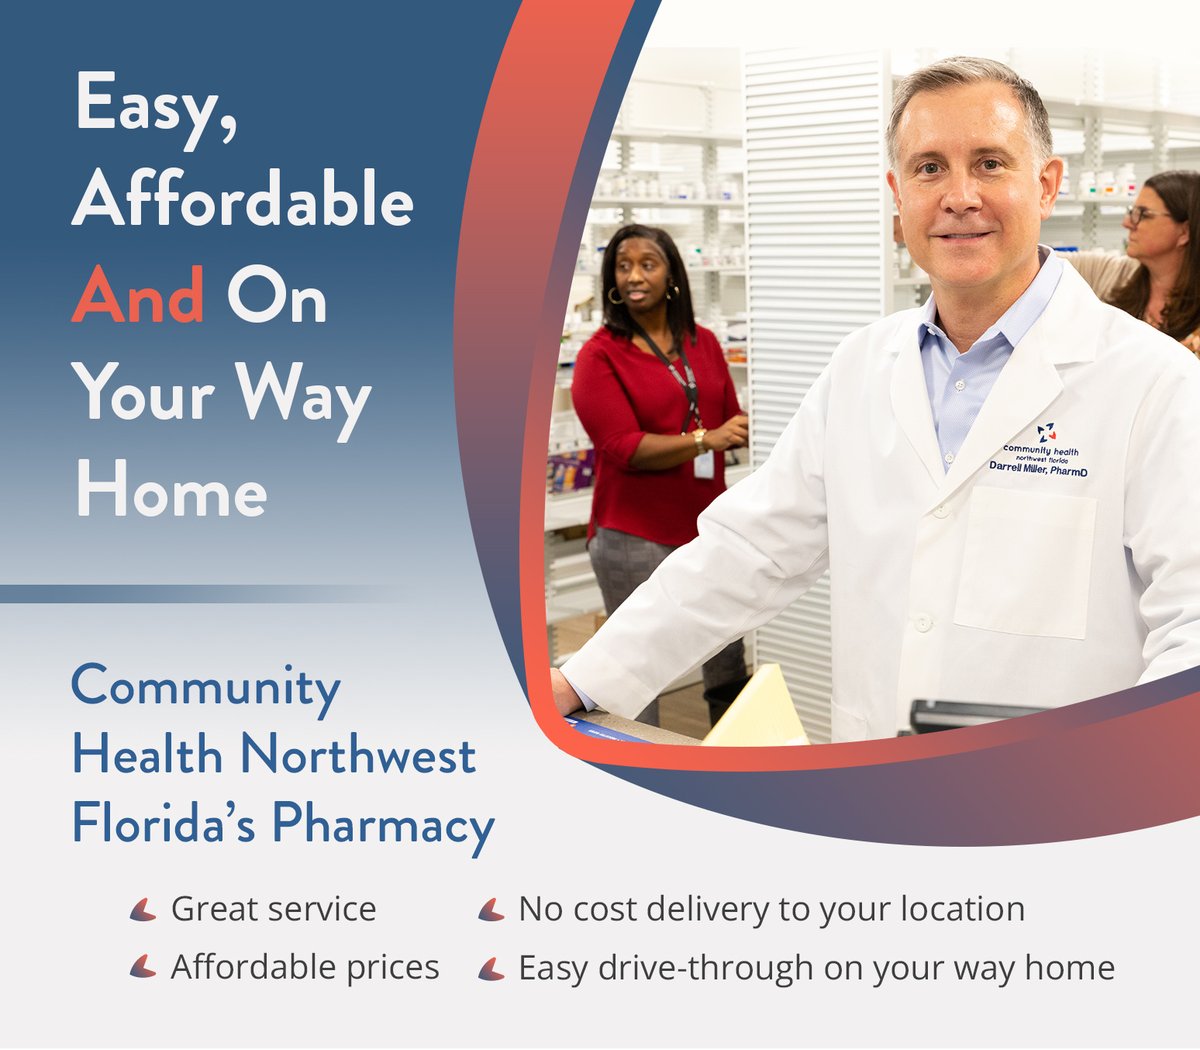 Community Health Northwest Florida's Pharmacy on Palafox Street is open to everyone. AND... when you fill your prescriptions at Community Health Northwest Florida's Pharmacy, you are supporting community programs. 🏢1400 N. Palafox Street Pensacola 📱 850.433.2165 #Pharmacy